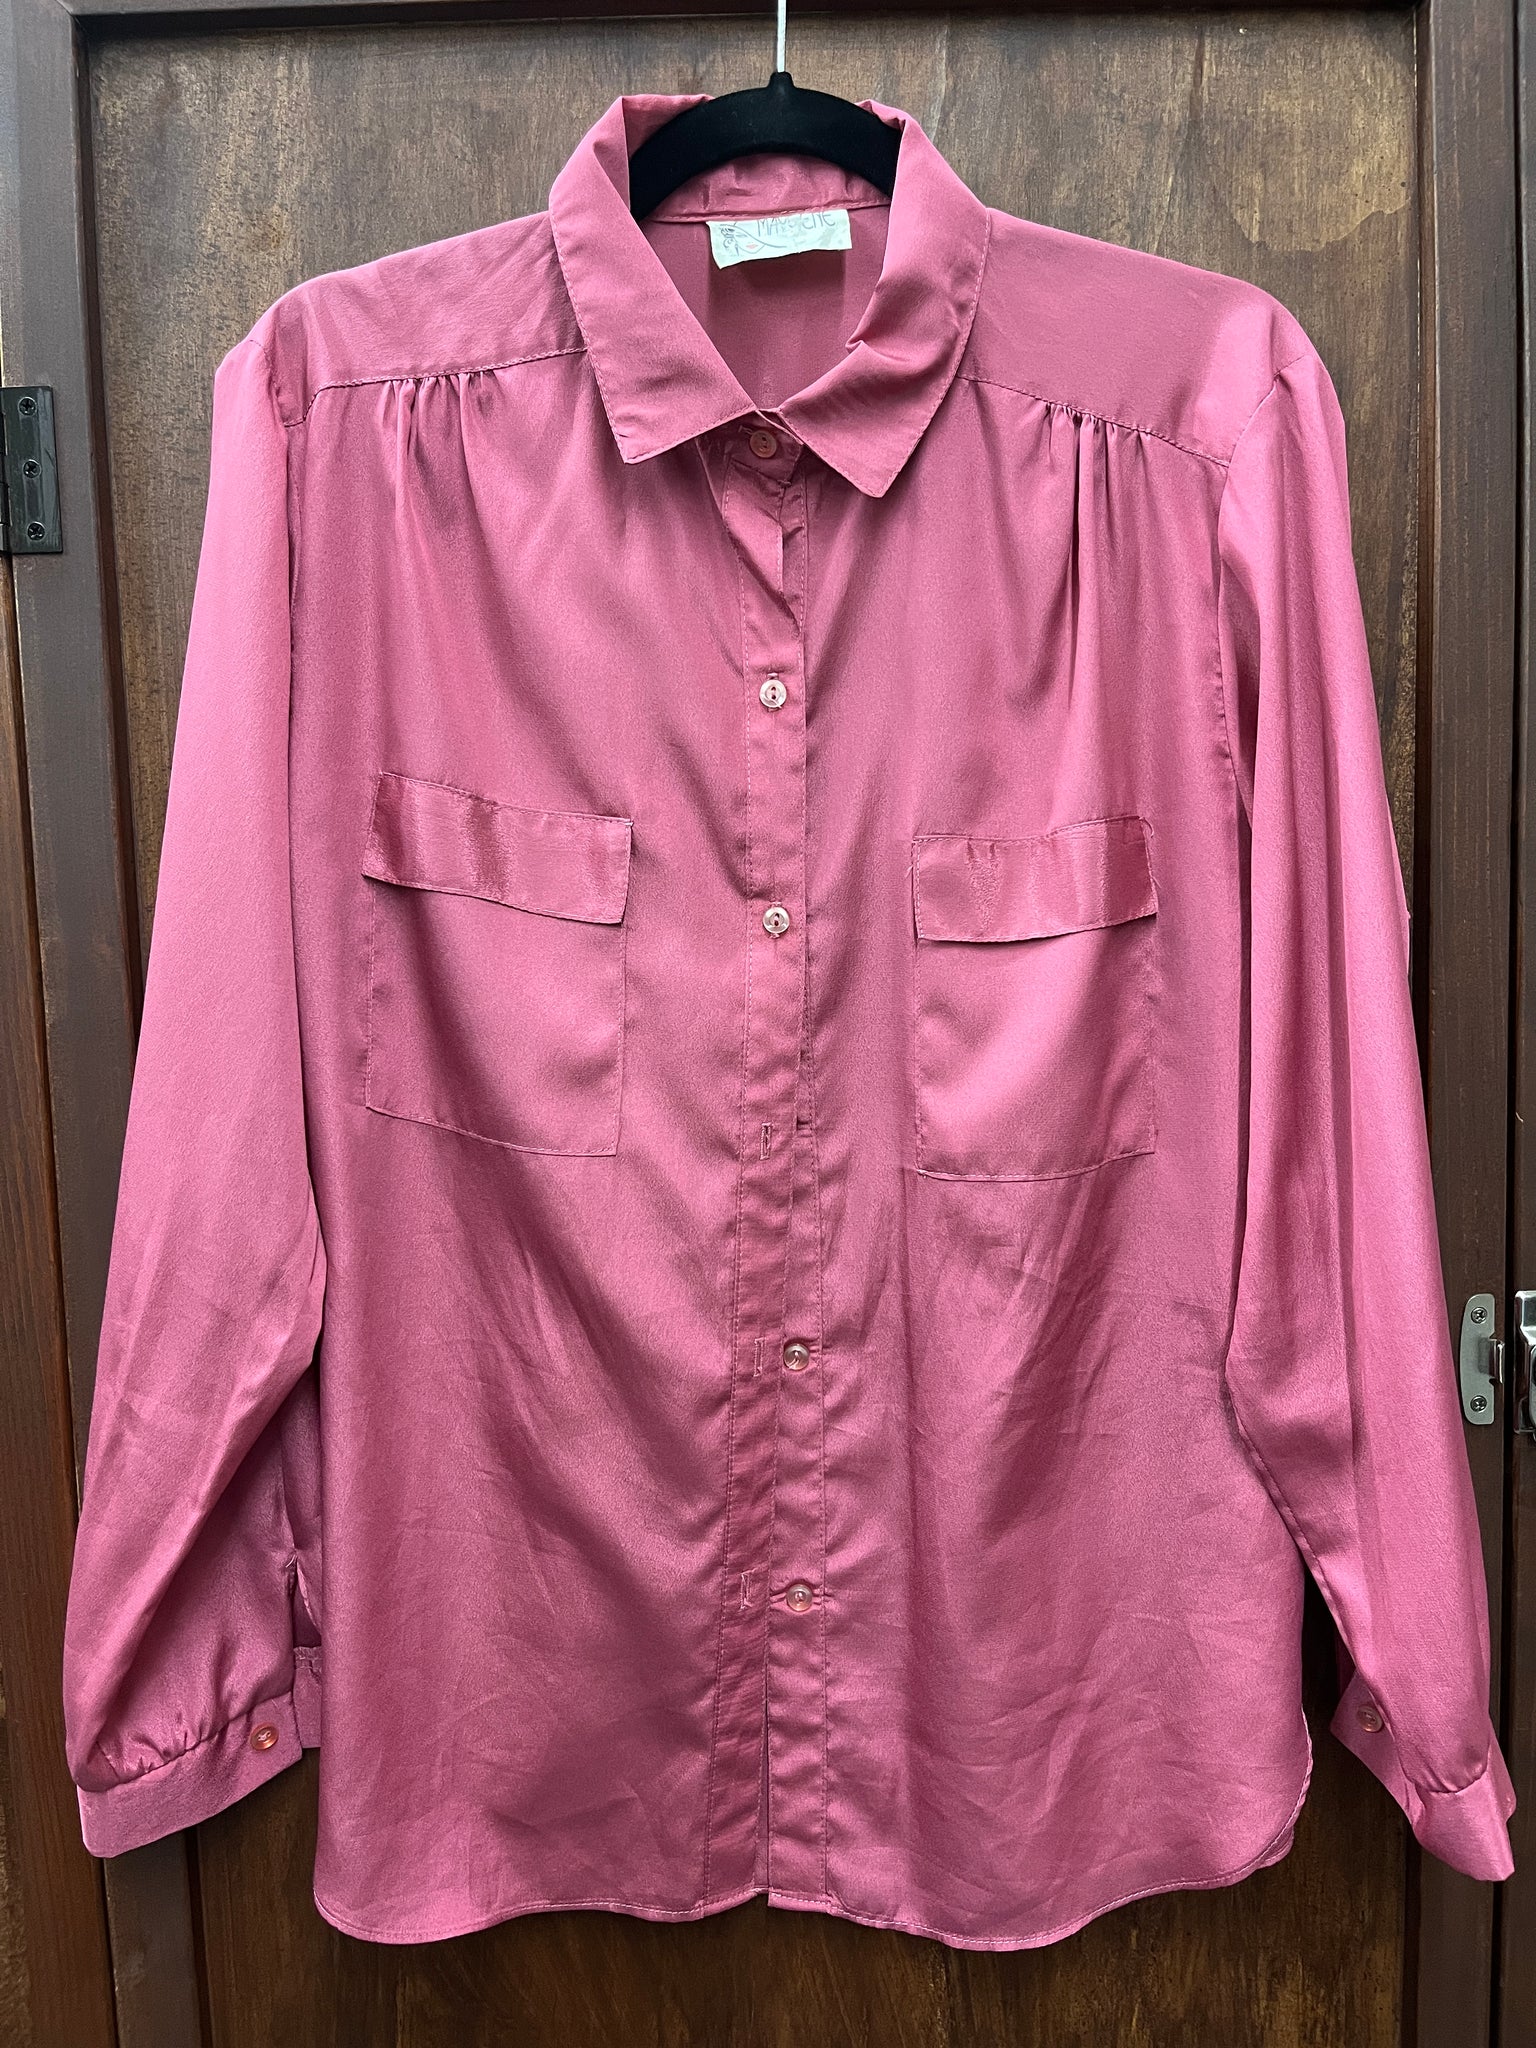 1980s TOP- Maygene-shimmery pink blouse